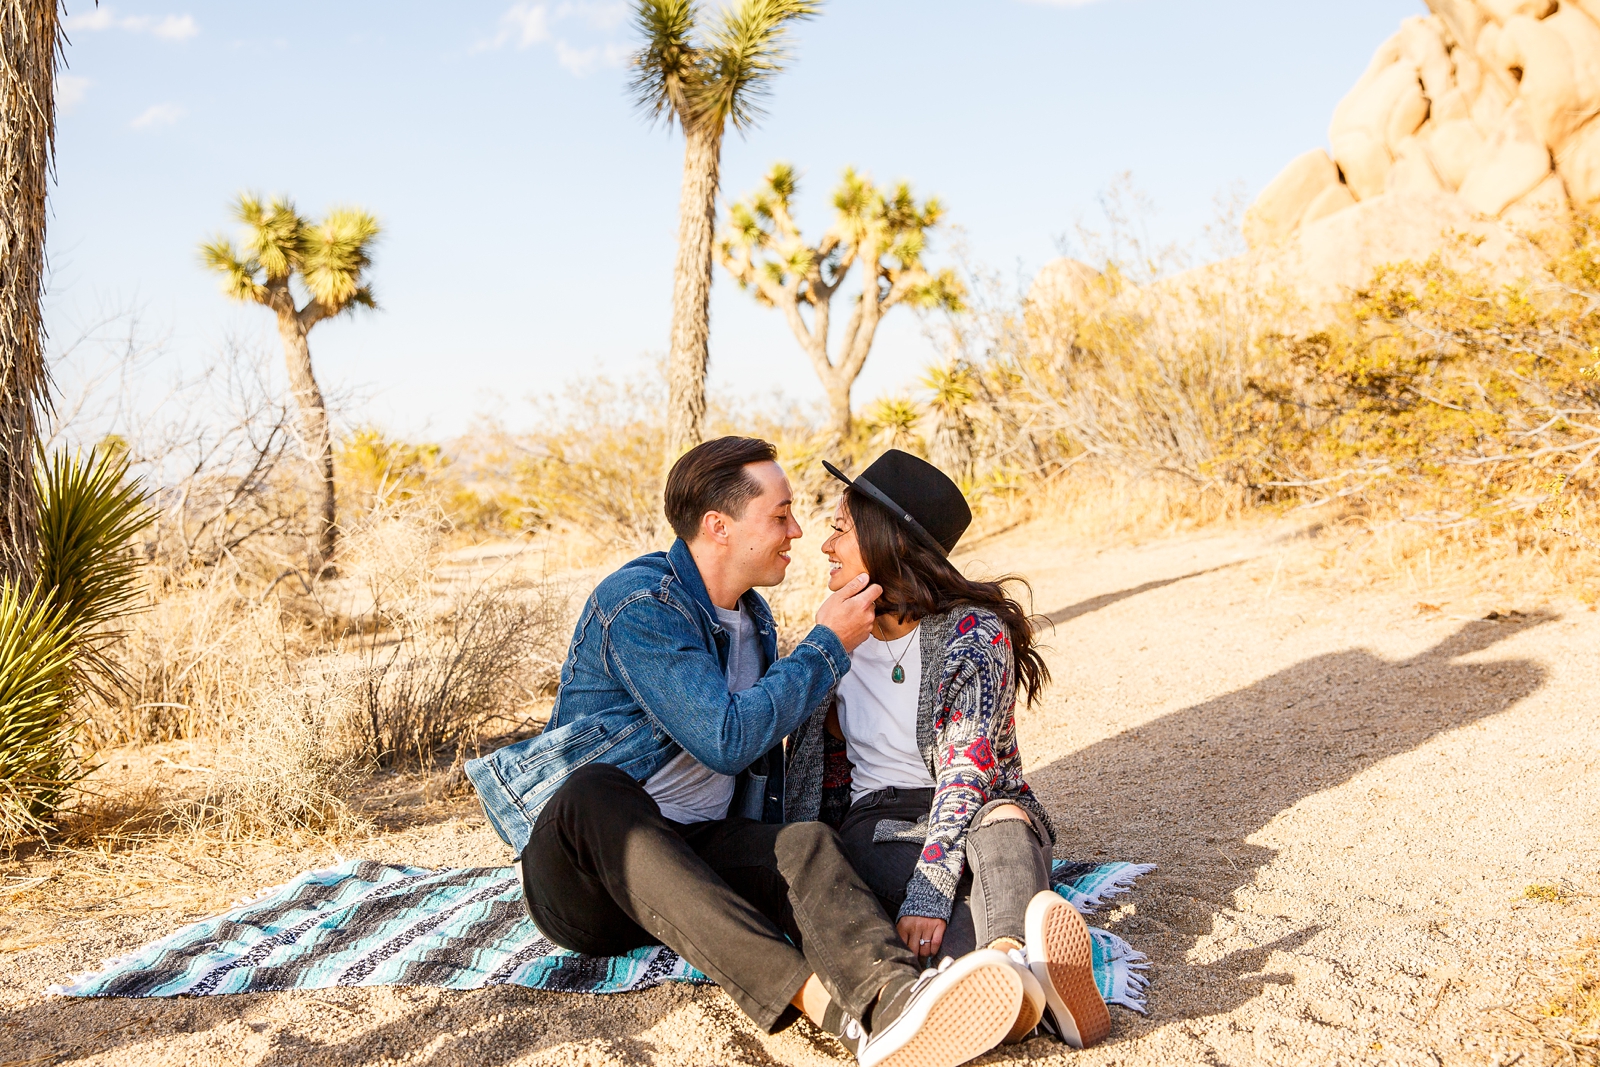 Adorable engaged couple cuddling on a blanket in Joshua Tree NP.